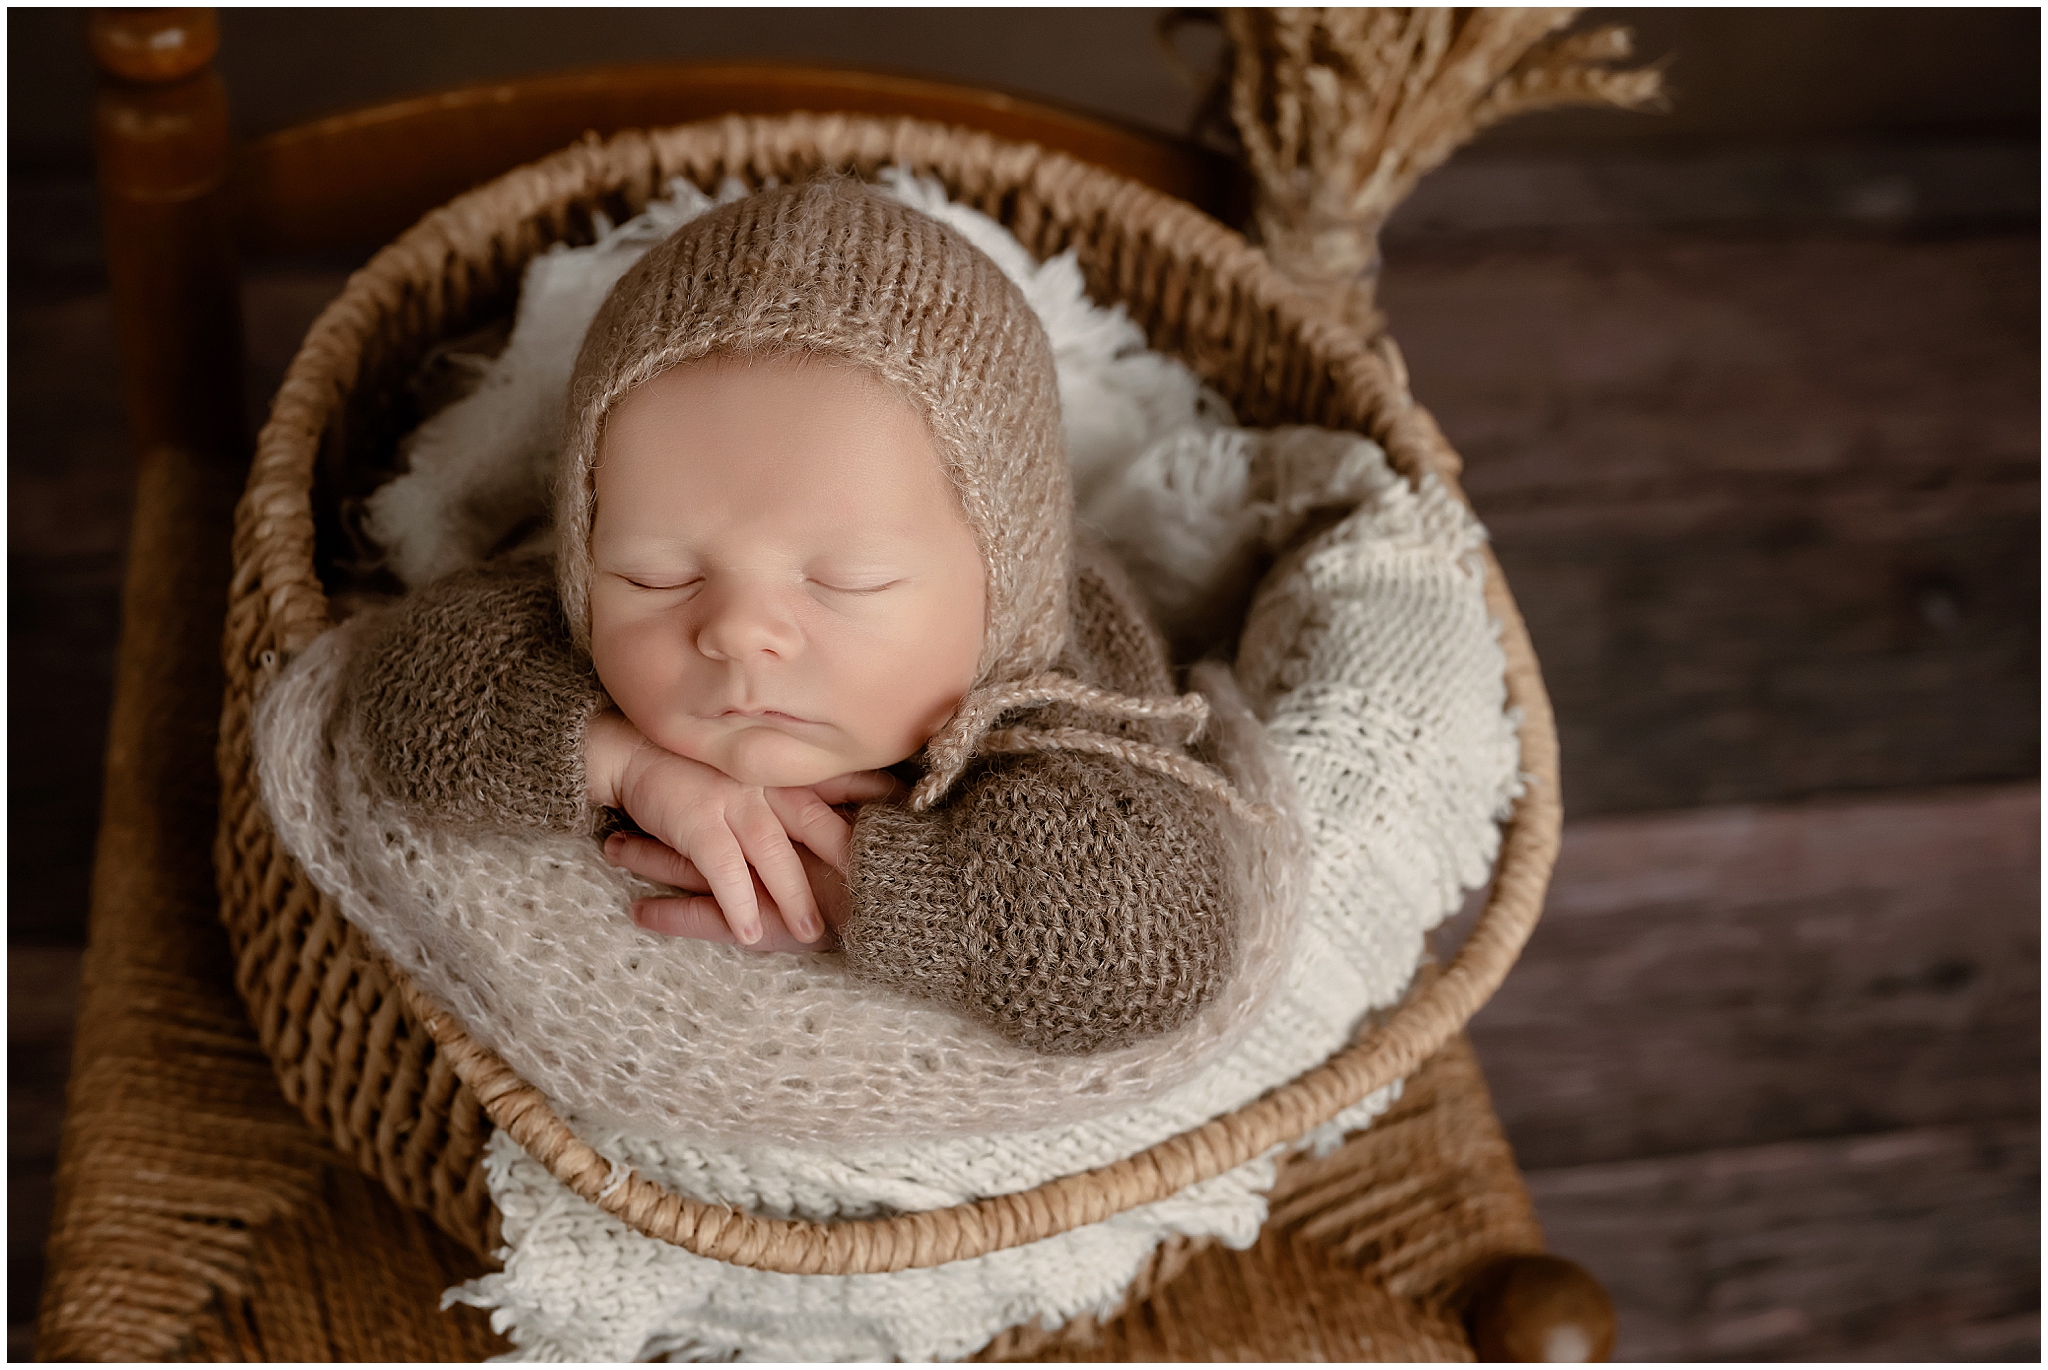 baby in basket at newborn photography session at studio in london ontario